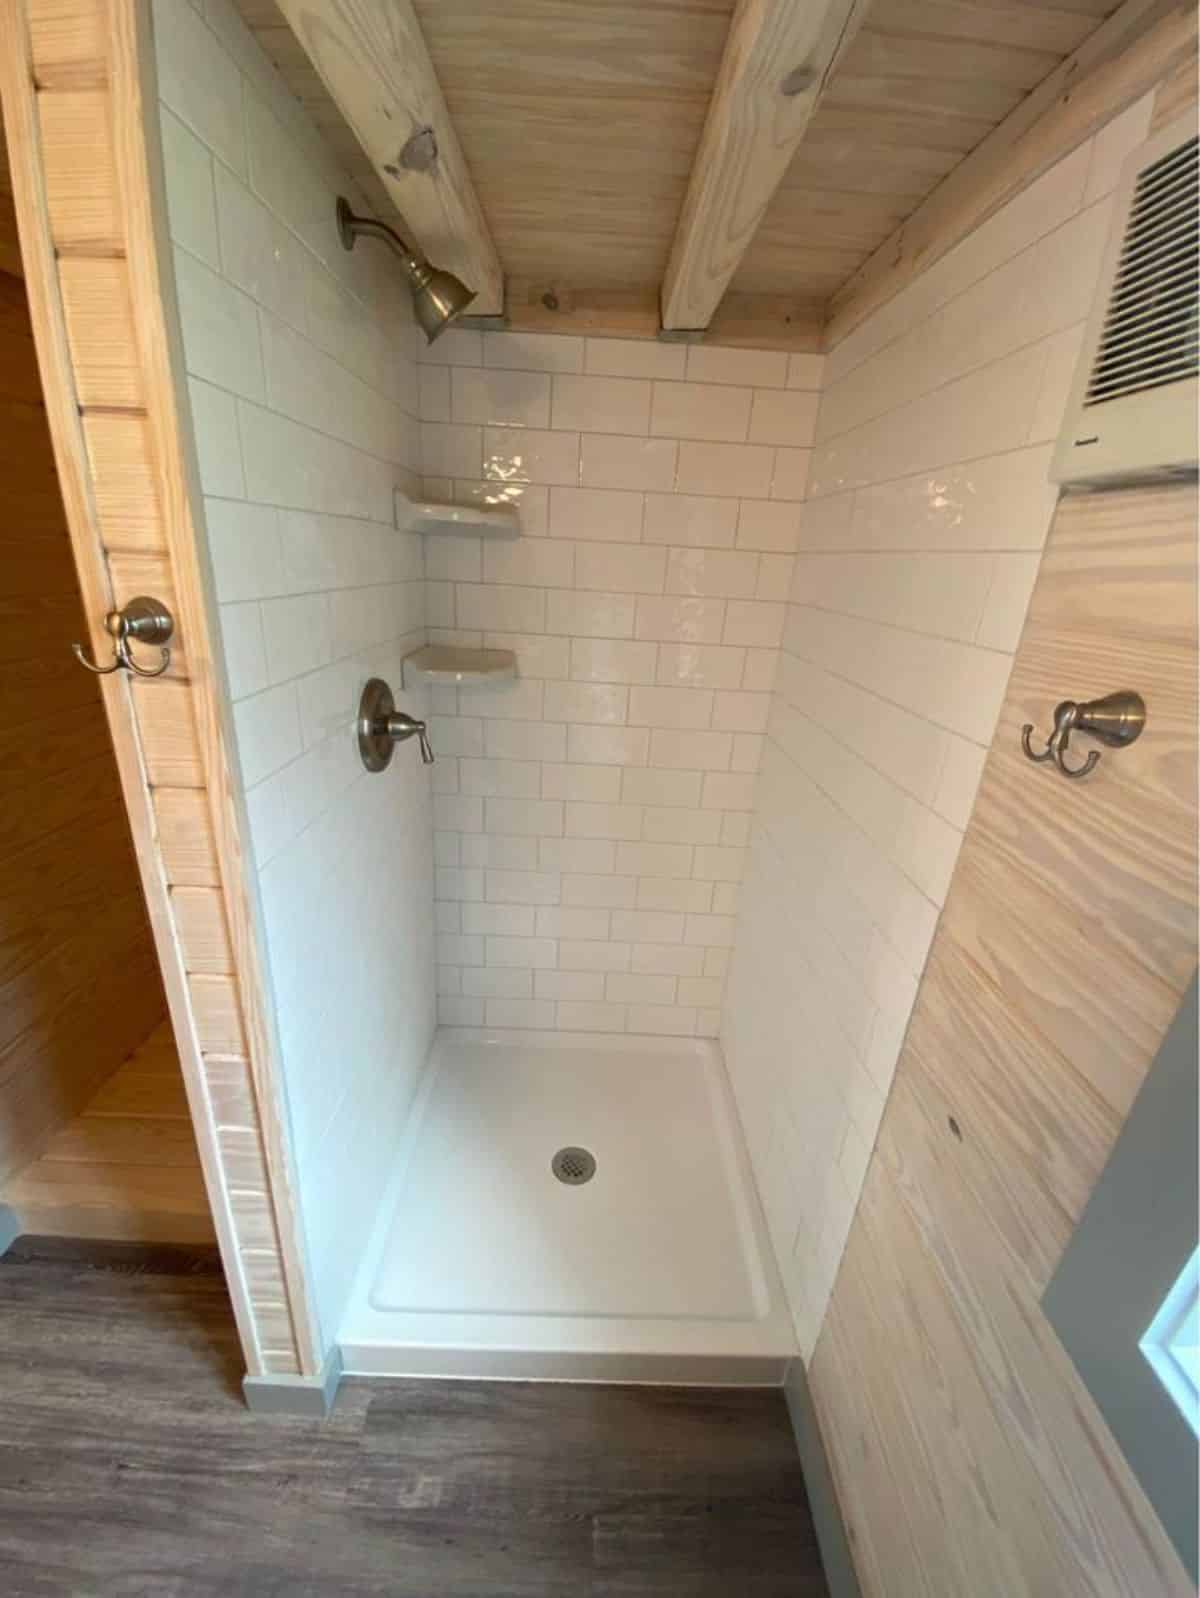 Separate shower area with hookup for washer dryer combo